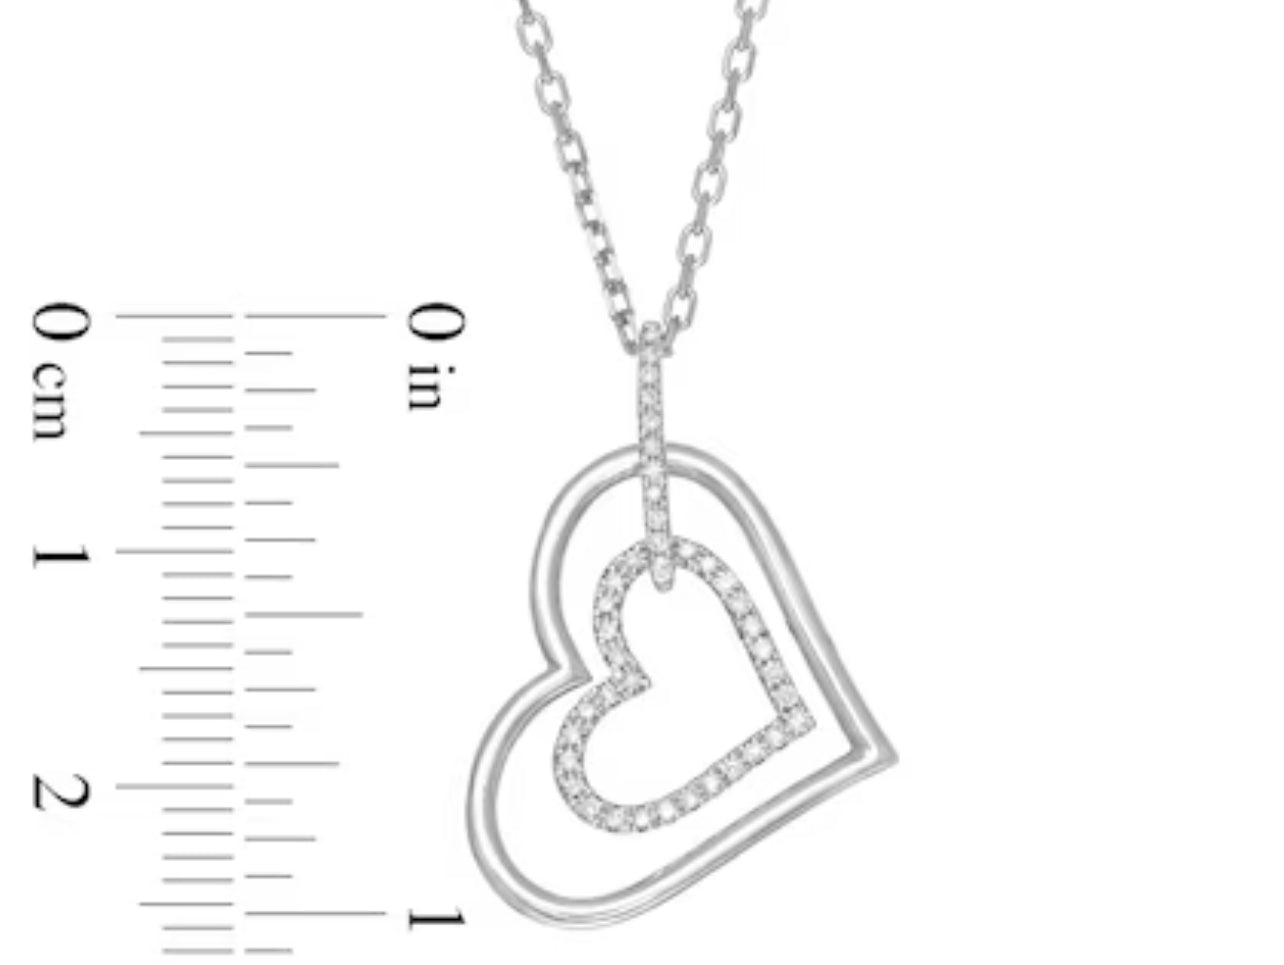 Vera Wang Love Collection 1/8 CT. T.W. Diamond Tilted Double Heart Outline Pendant in Sterling Silver - 19"